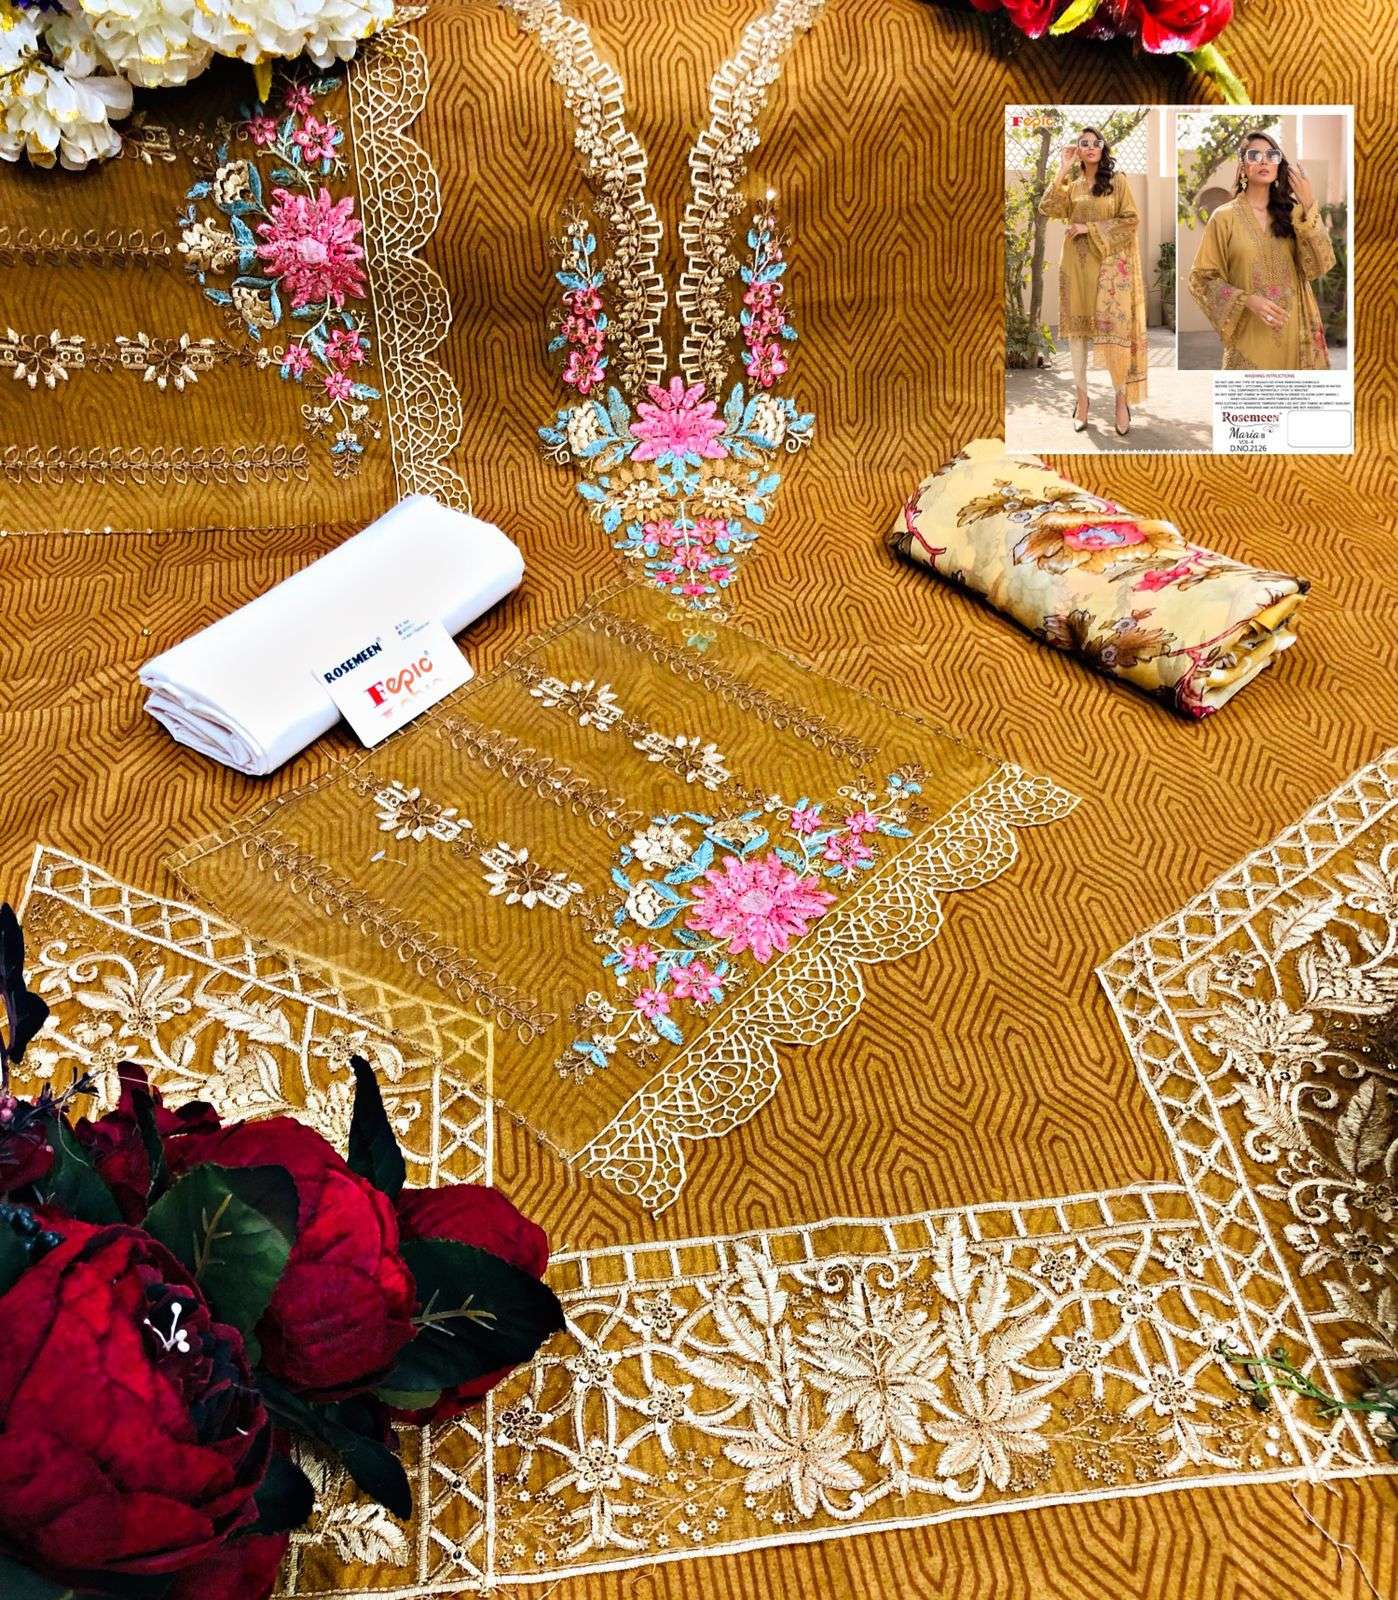 FEPIC PRESENTS ROSEMEEN MARIA B 4 EMBROIDERED LAWN COLLECTION WHOLESALE PAKISATNI SUITS